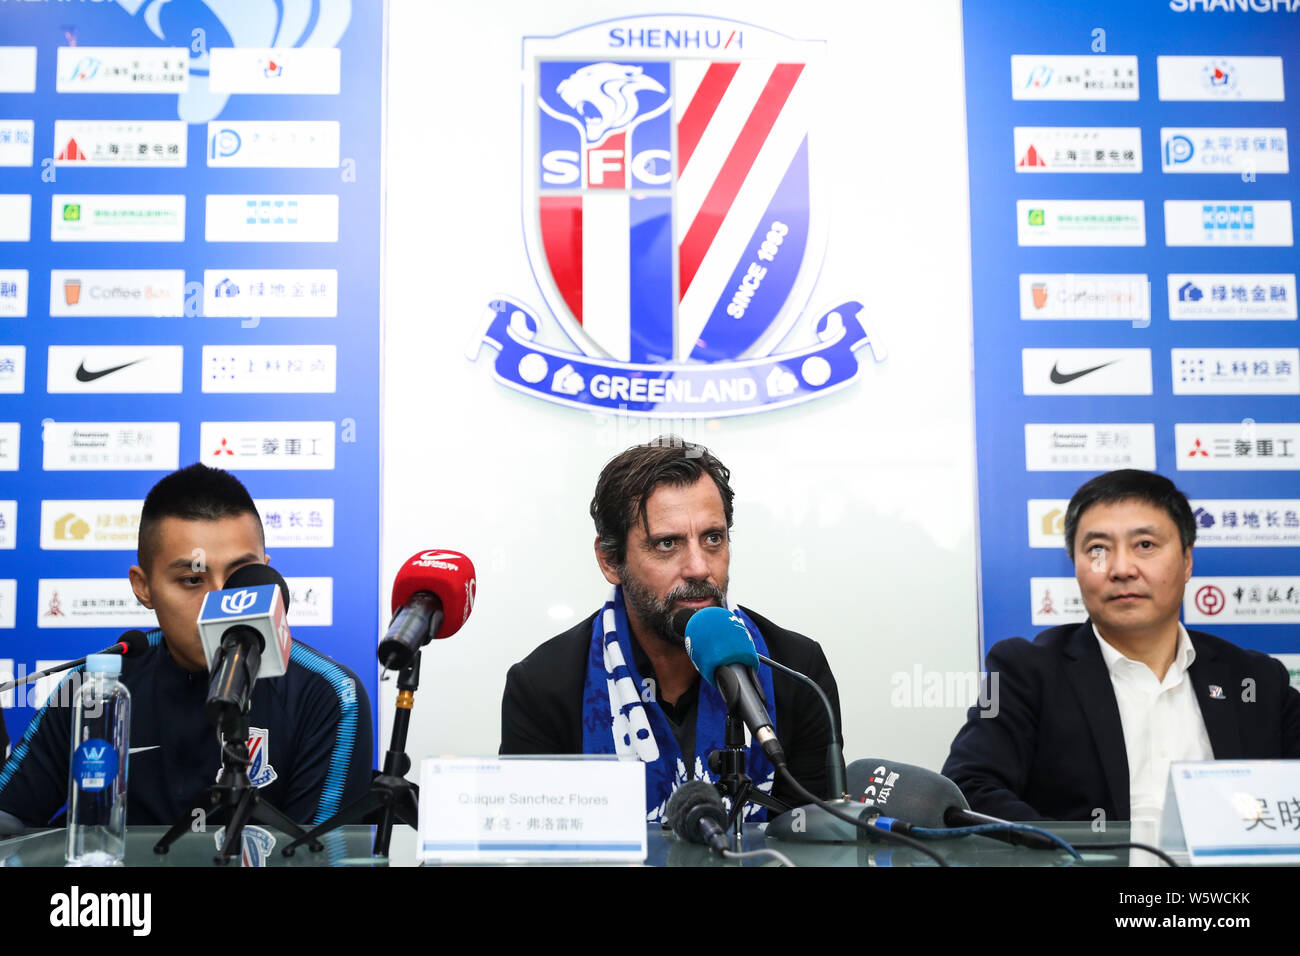 Spanish football manager Quique Sanchez Flores, center, the new head coach of Shanghai Greenland Shenhua FC, attends a press conference in Shanghai, C Stock Photo